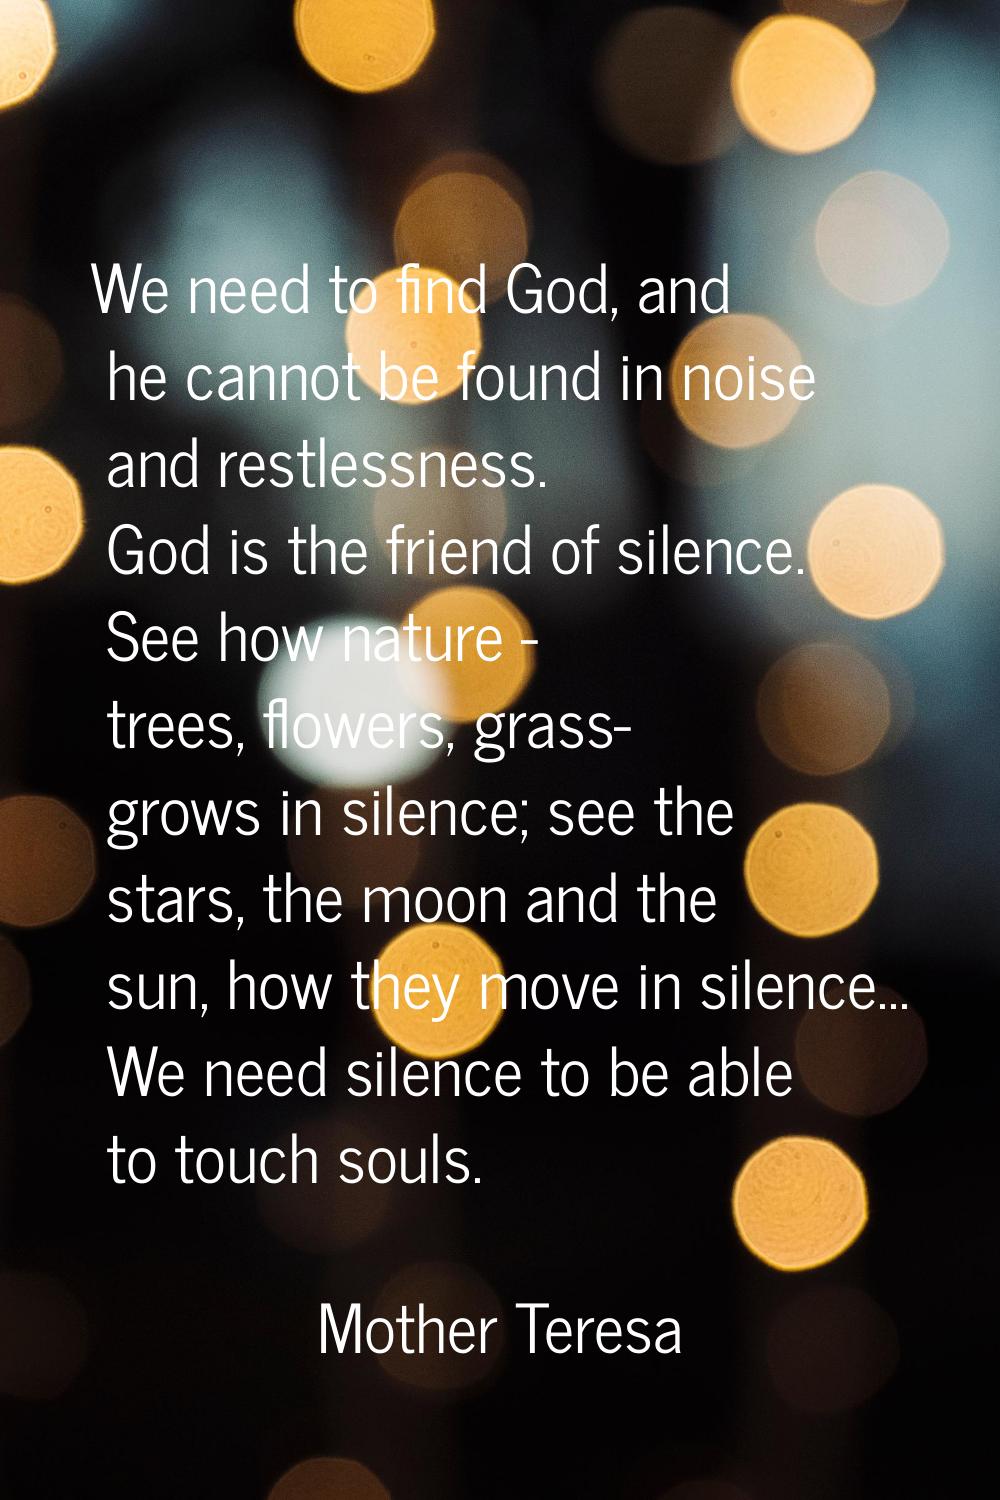 We need to find God, and he cannot be found in noise and restlessness. God is the friend of silence